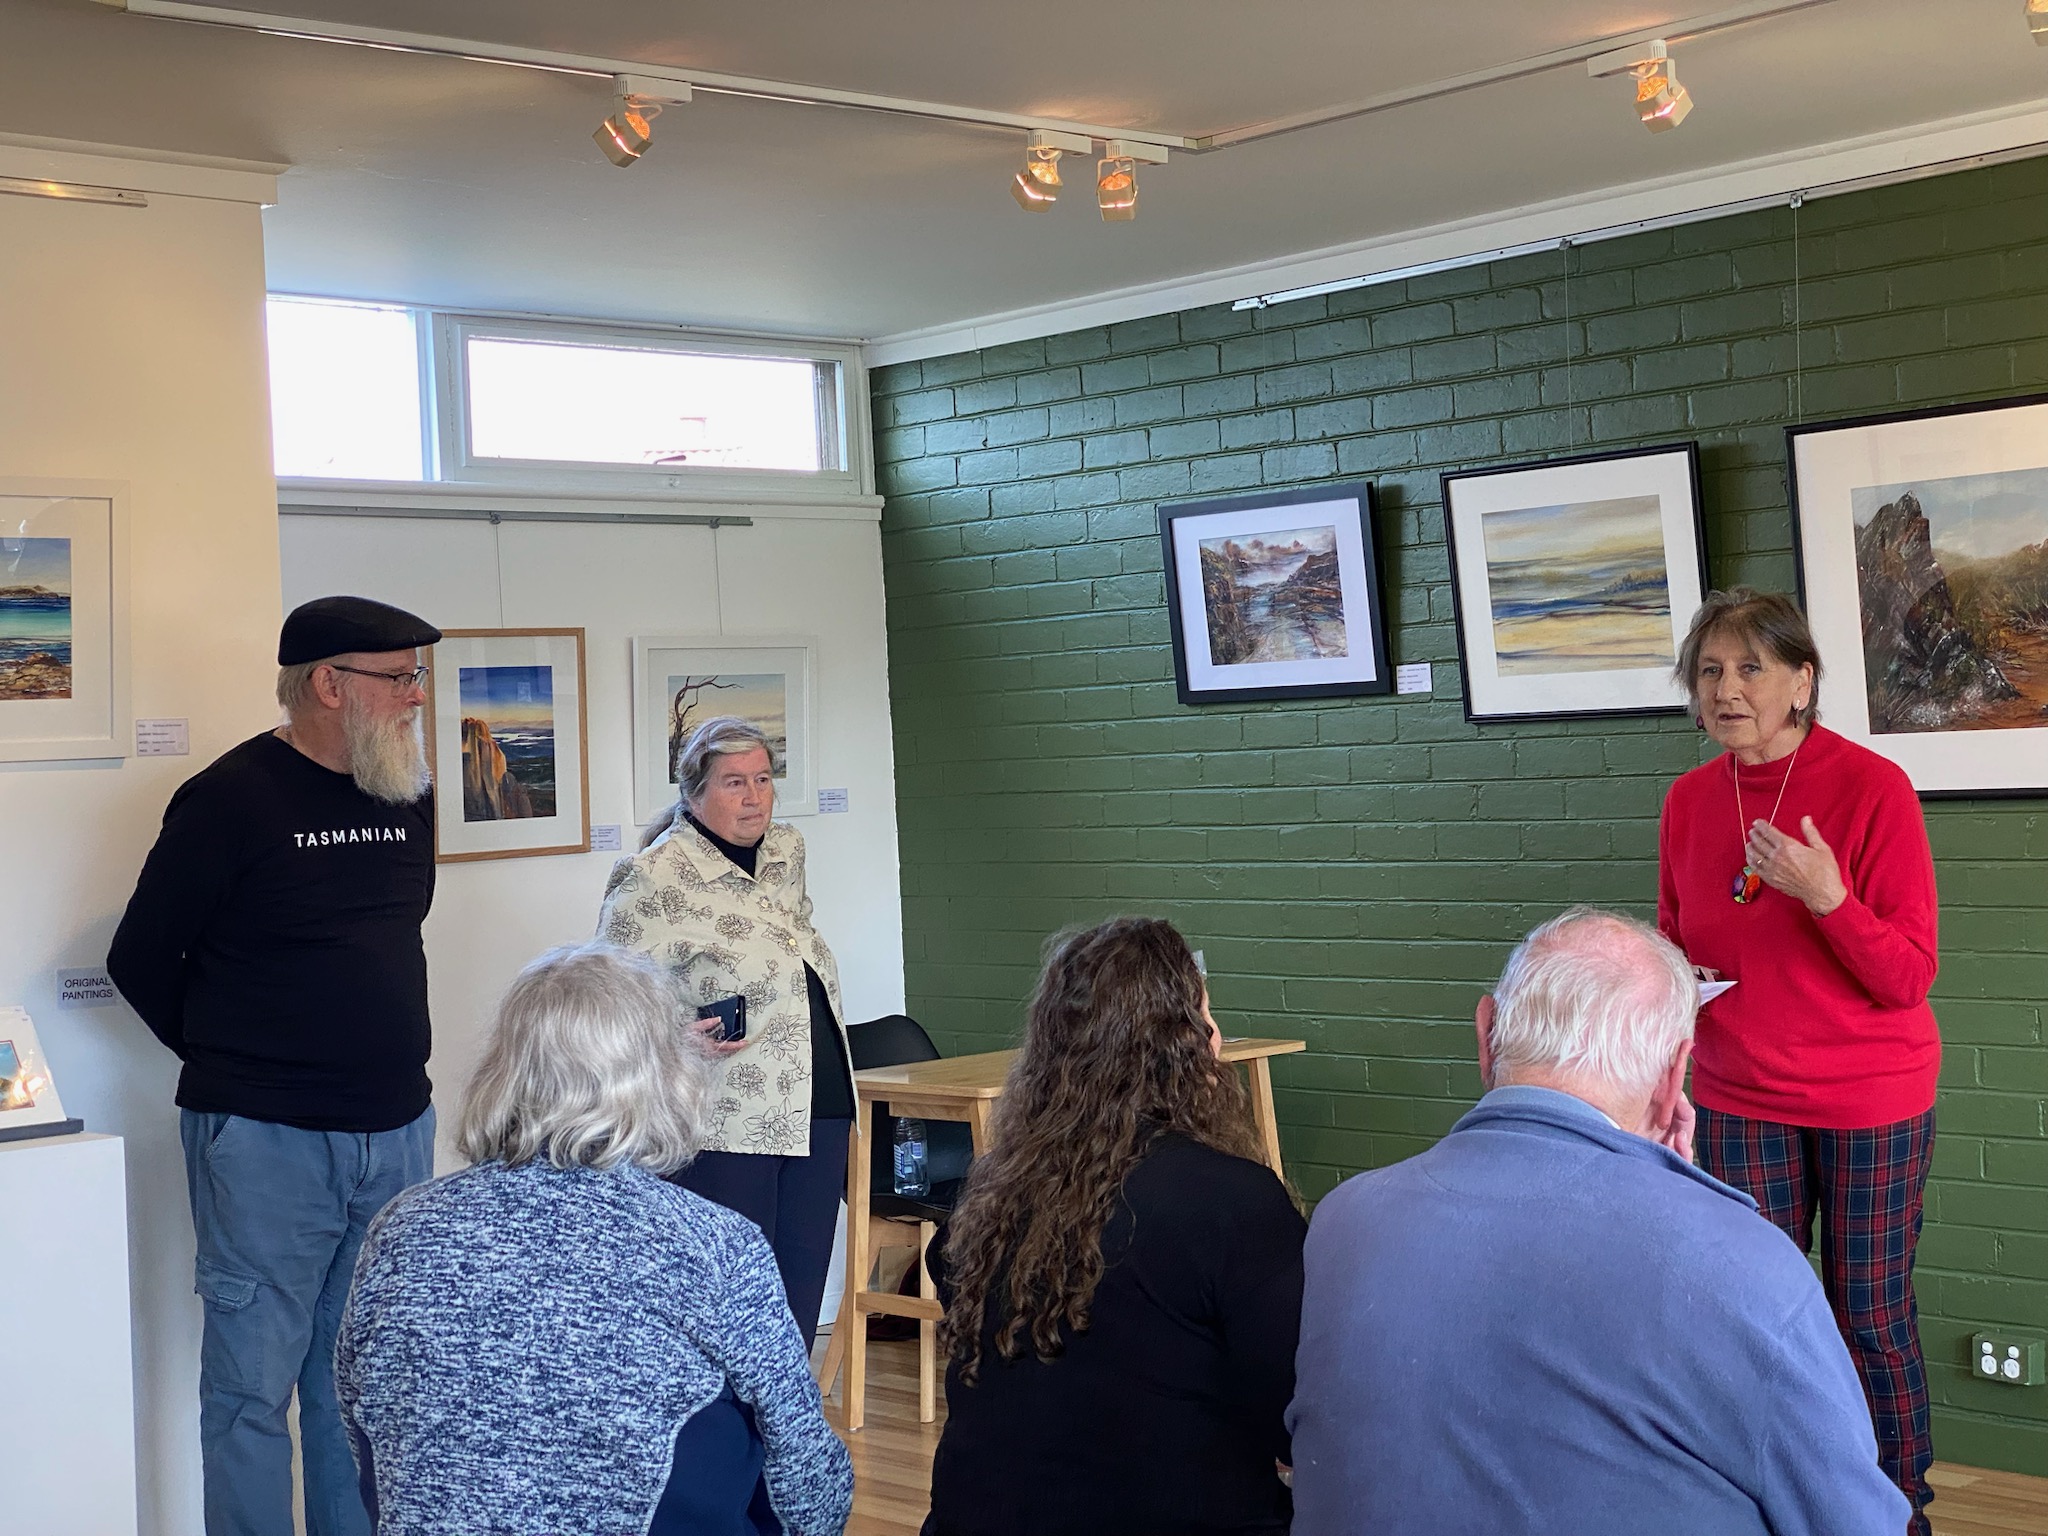 Image show the opening of Evelyn Antonysen's exhibition inside of the Poatina art gallery as part of their story Exhibition news The Inspiring Poatina Tree Art Gallery Winter Exhibitions Art Trails Tasmania as part of their Artists Ensemble membership